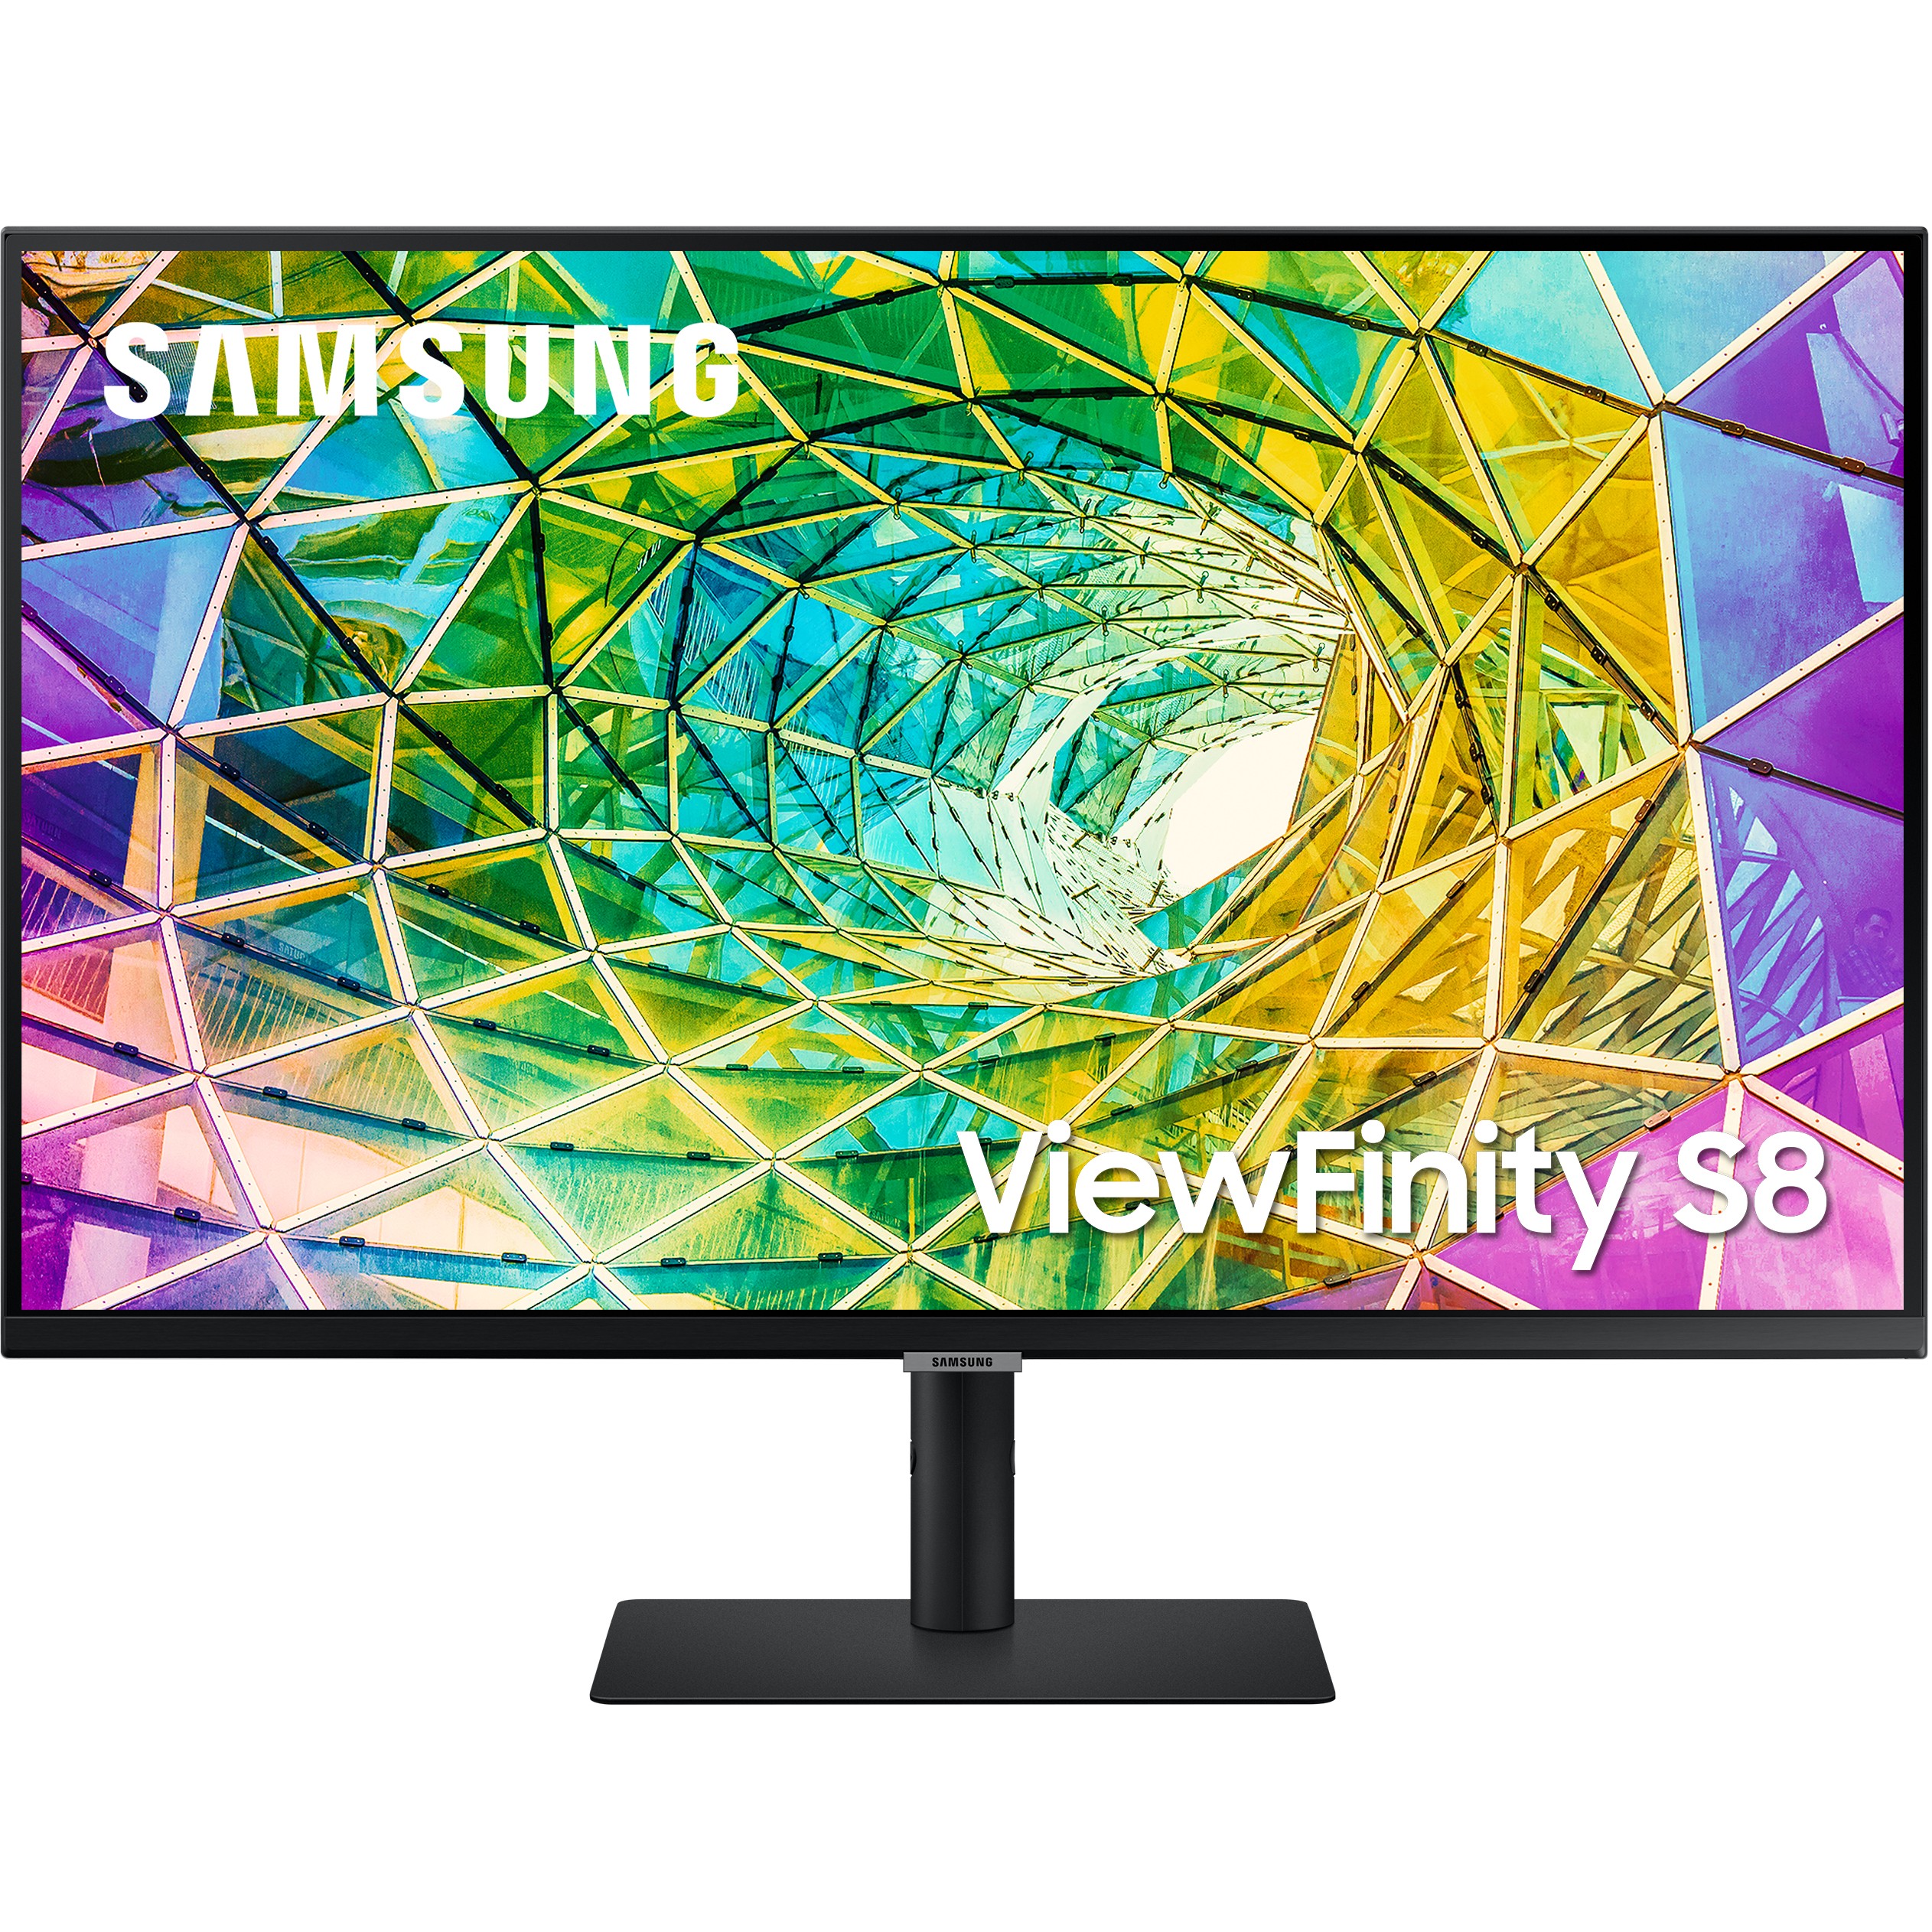 Samsung ViewFinity S8 S80A LED display - LS32A800NMPXEN